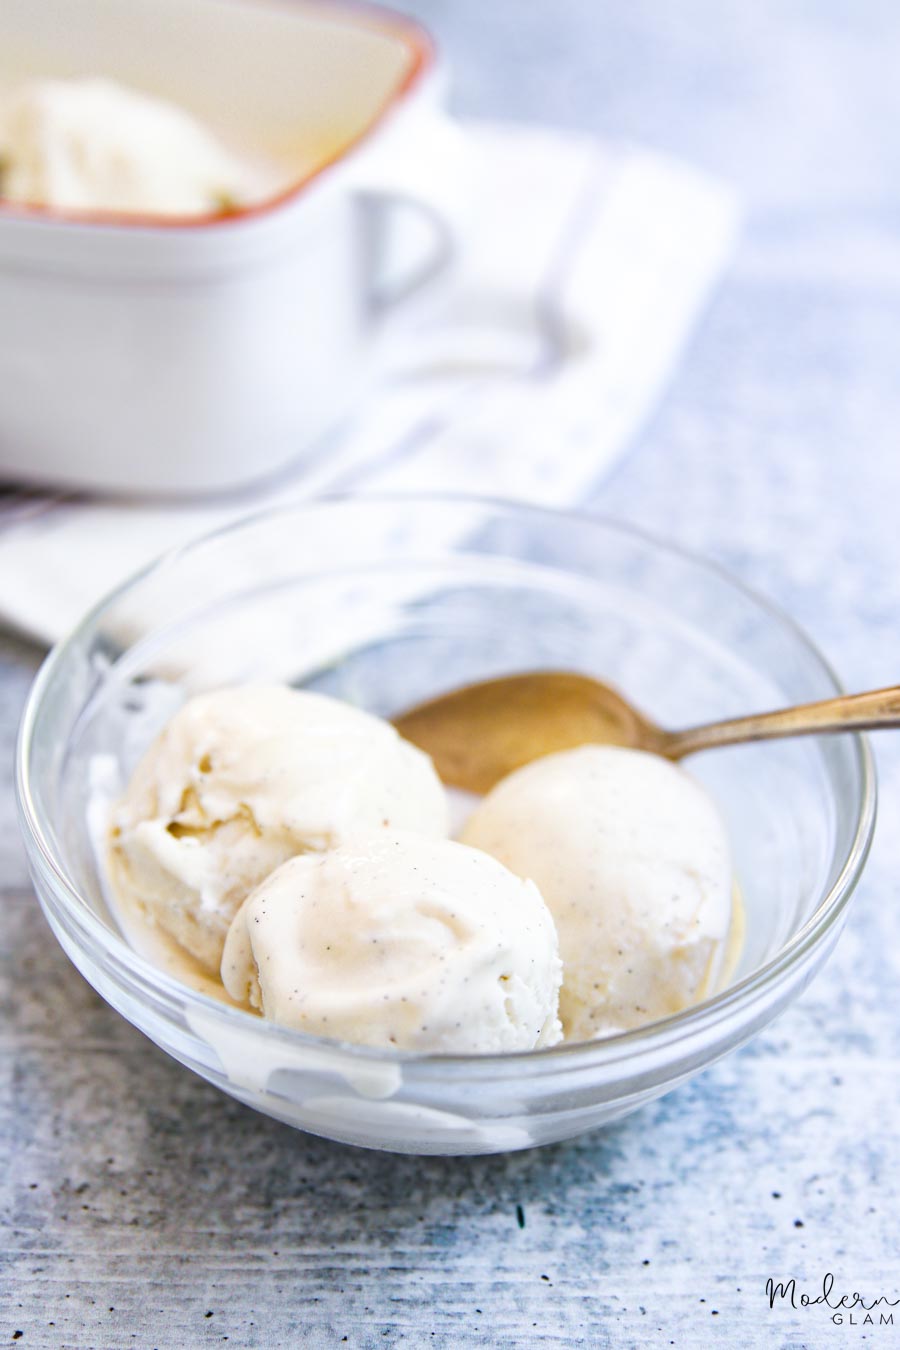 This Paleo vanilla bean ice cream is to die for. It is a non-dairy recipe, so if you have milk allergies, it is the perfect alternative to ice cream. #non-dairy #paleo #paleodesserts #desserts #icecream 